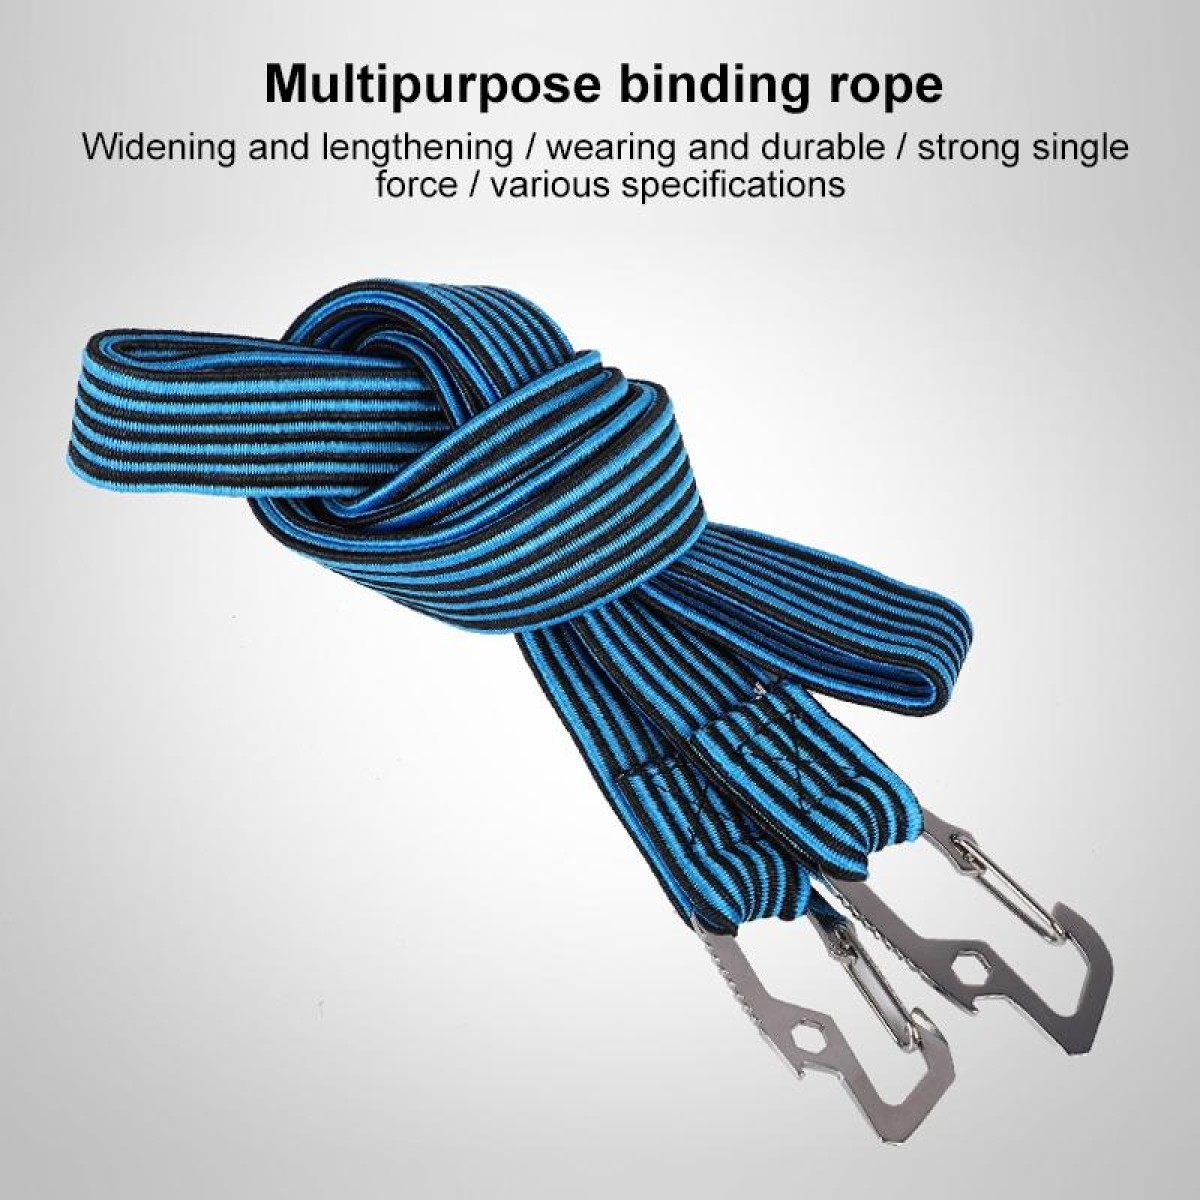 4m Elastic Strapping Rope Packing Tape for Bicycle Motorcycle Back Seat with Hook (Blue)